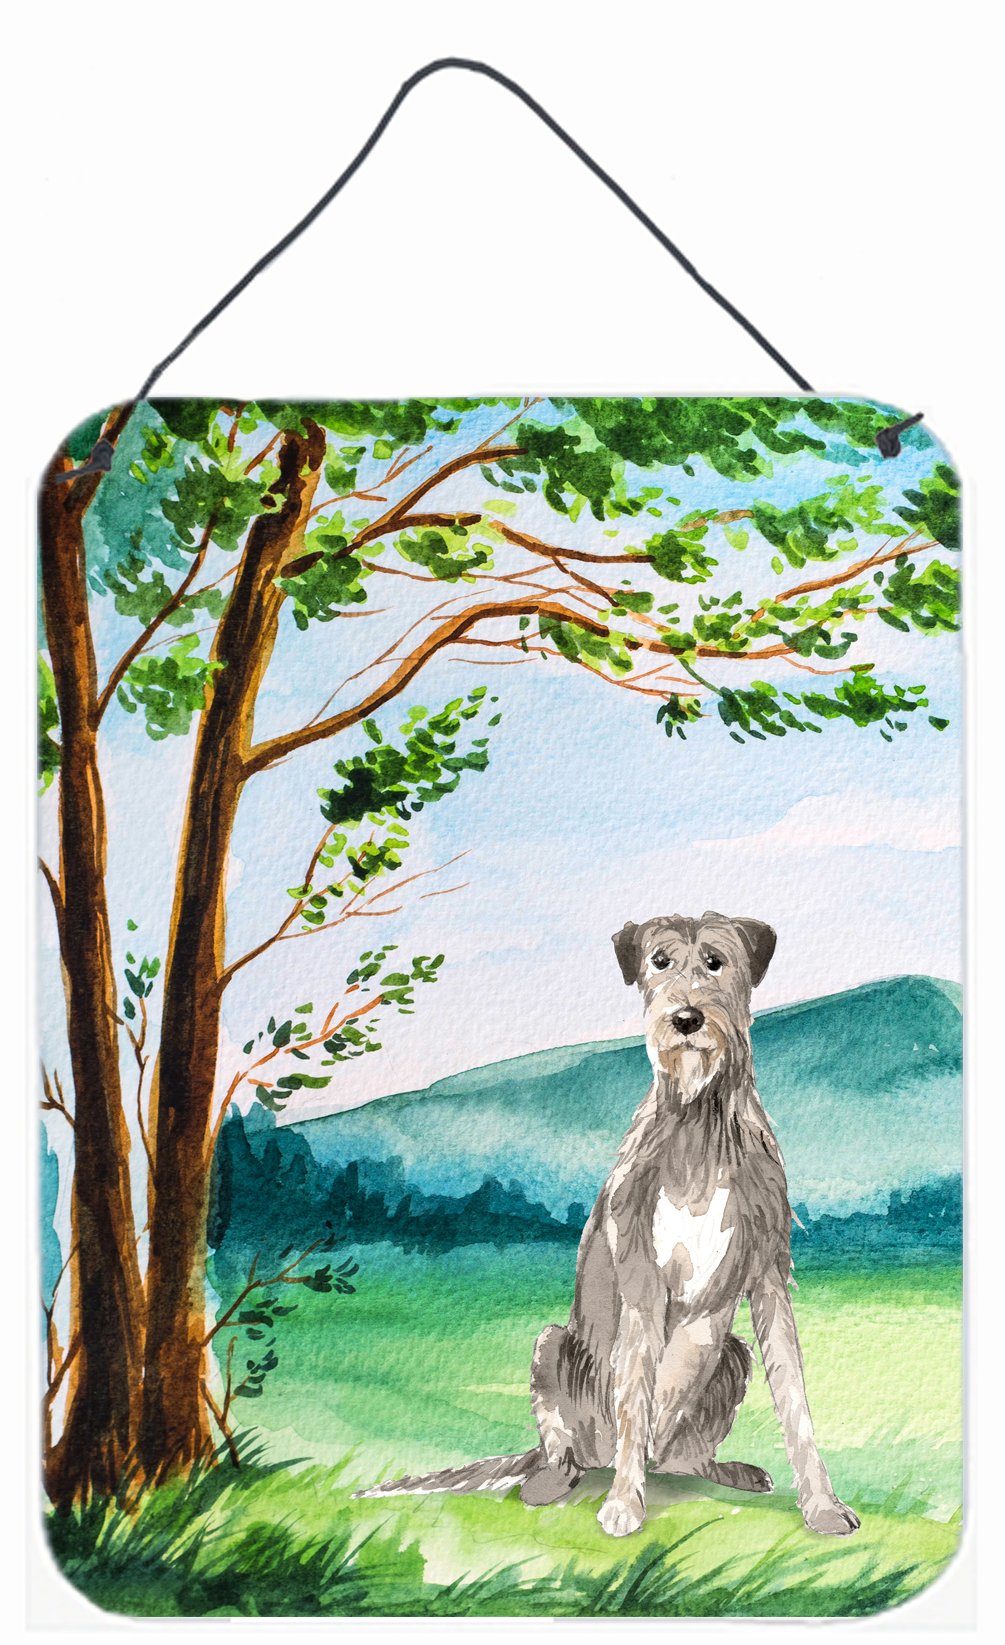 Under the Tree Irish Wolfhound Wall or Door Hanging Prints CK2570DS1216 by Caroline's Treasures